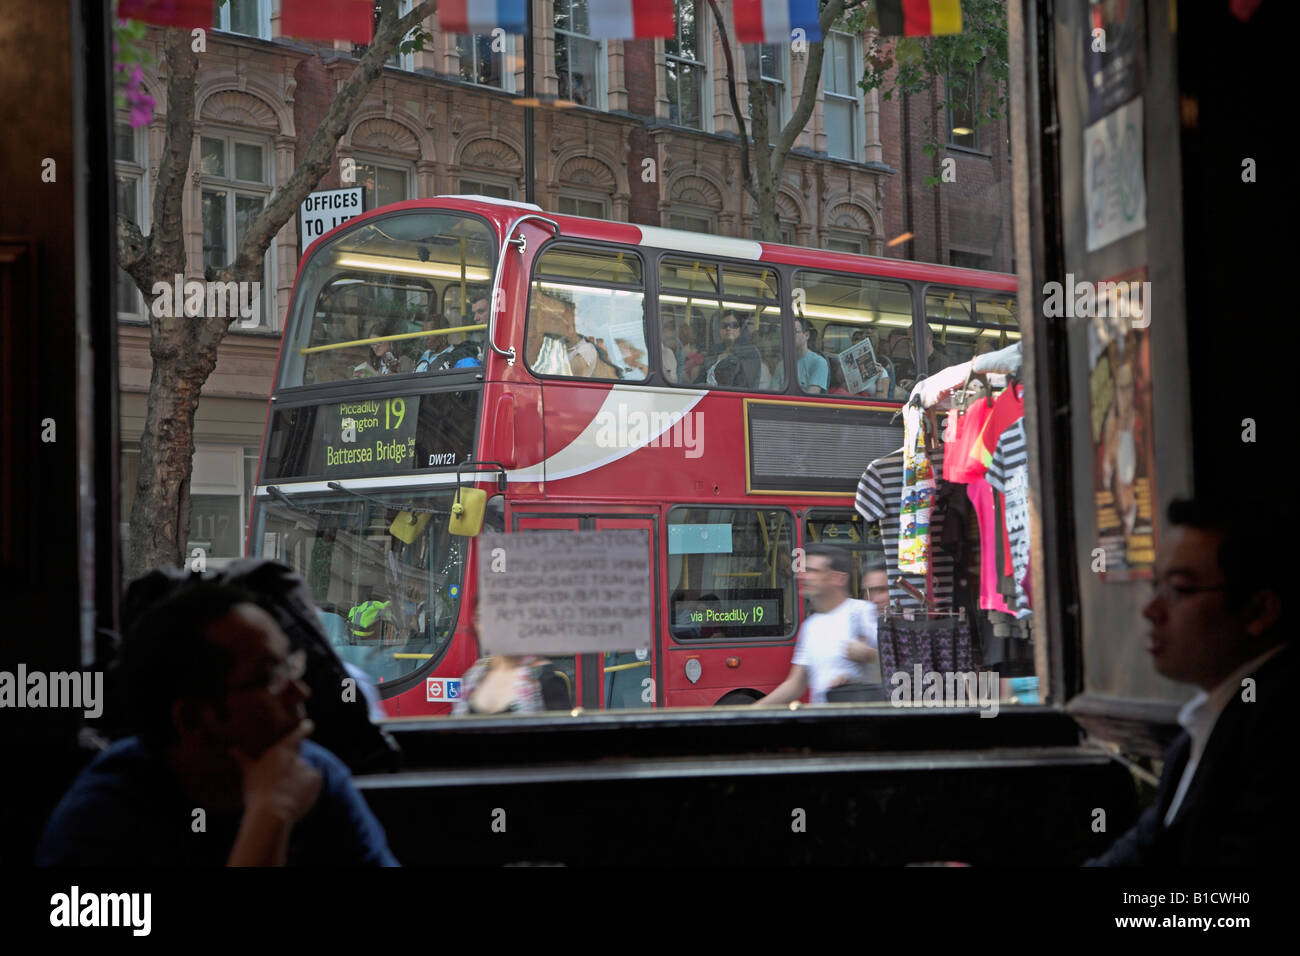 Red double decker bus busy street scene framed by window, central London, England Stock Photo